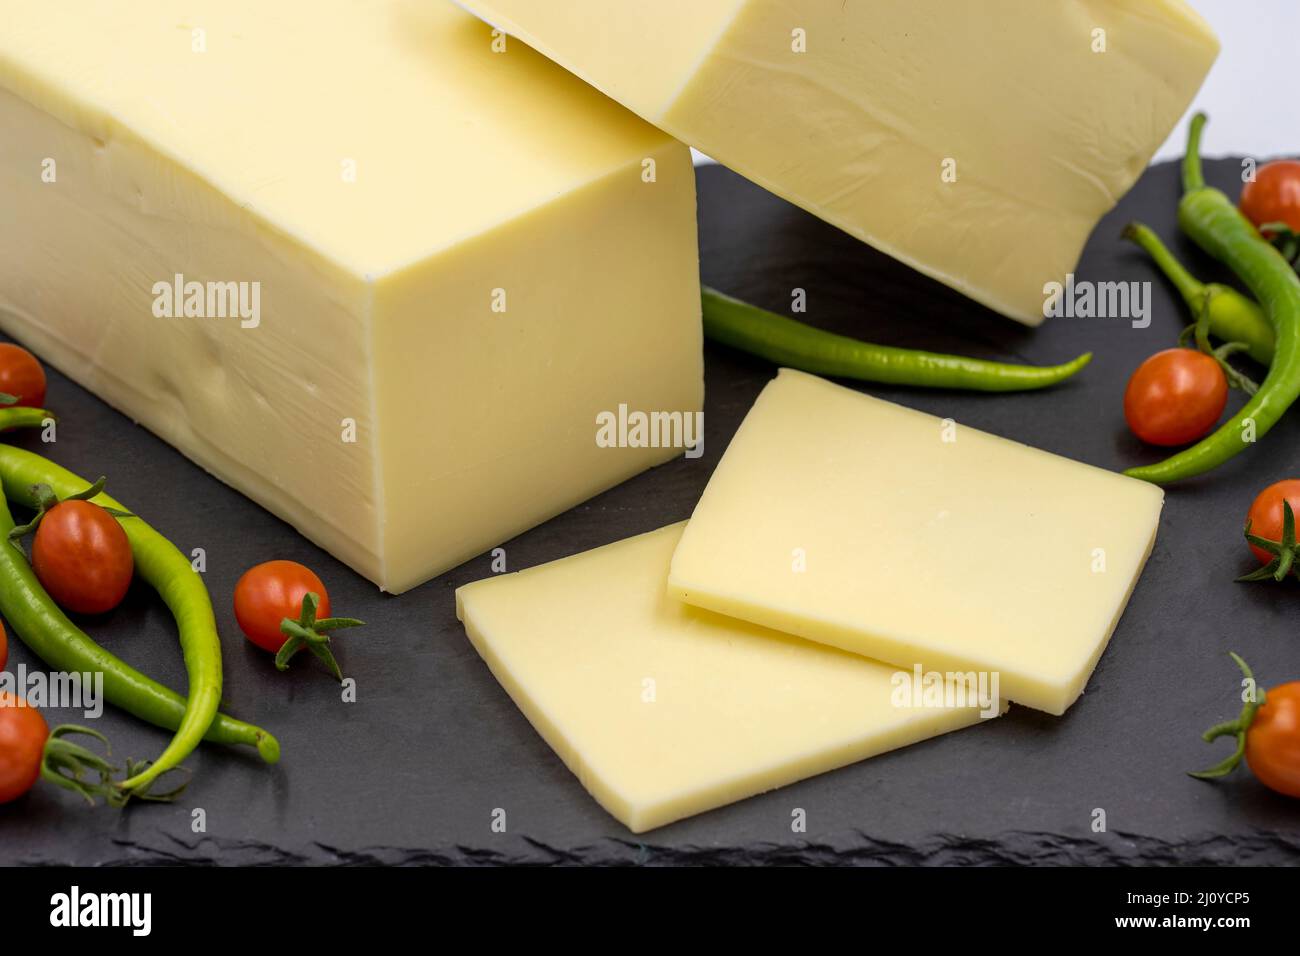 Cheddar cheese or kashkaval cheese on white background. Cheese slices on the serving board Stock Photo